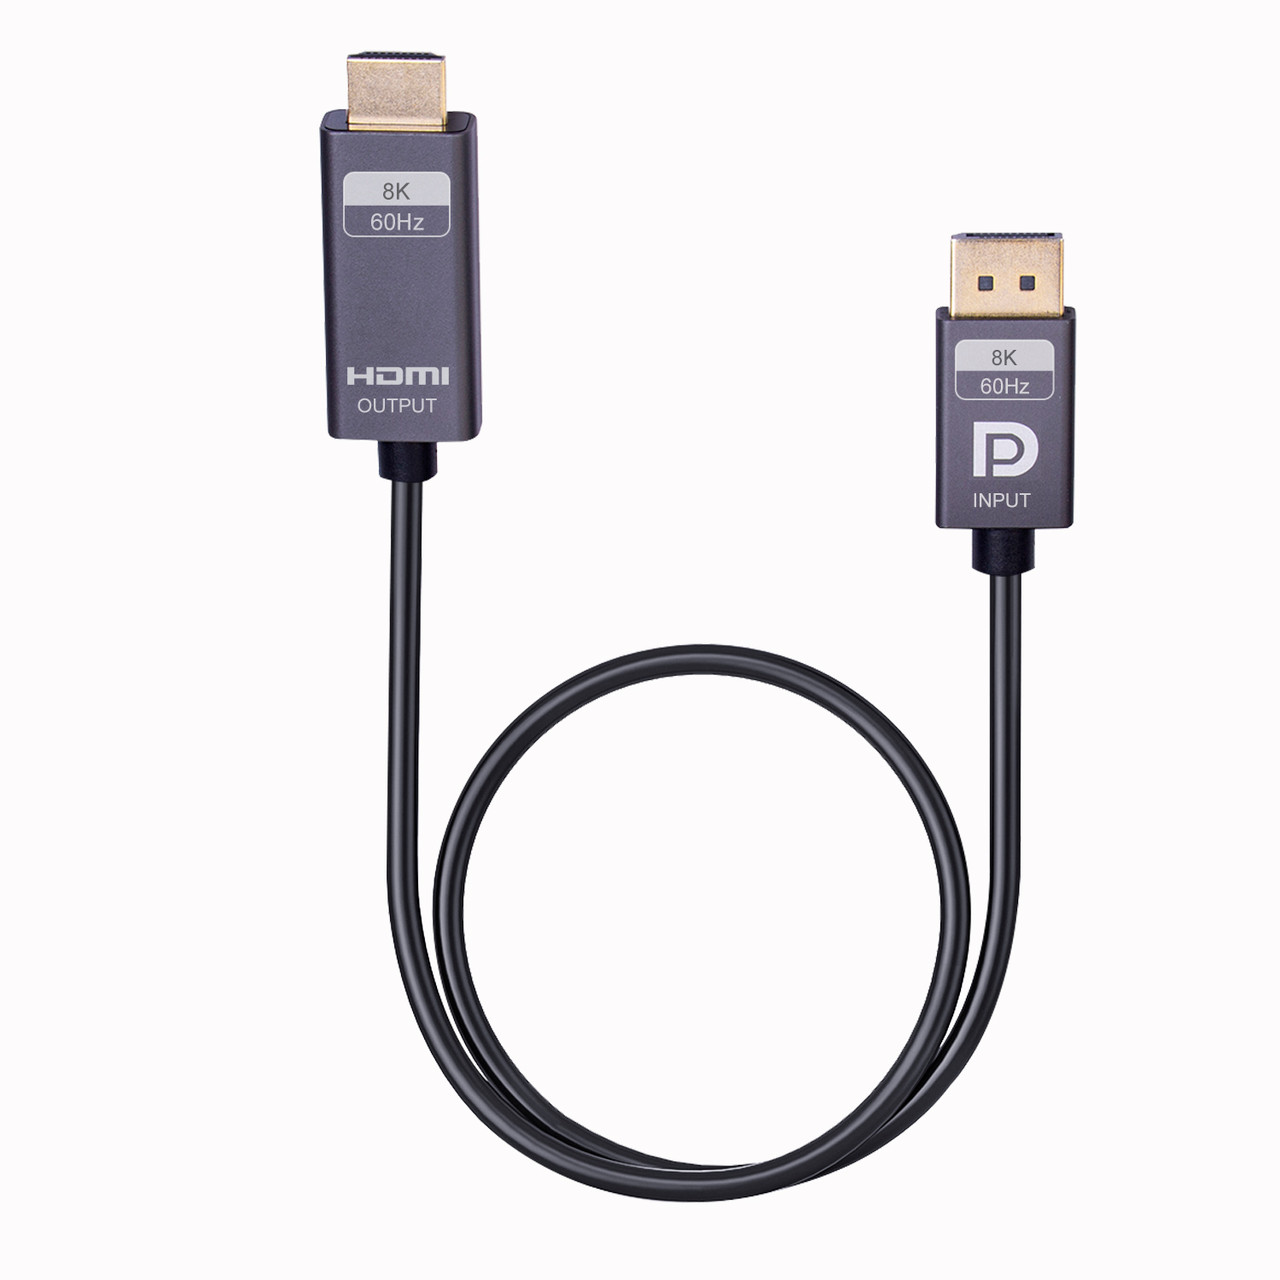 10 Foot DisplayPort 1.4 Male to HDMI 2.1 Male Cable, UHD 8K/60Hz, 4K/120Hz